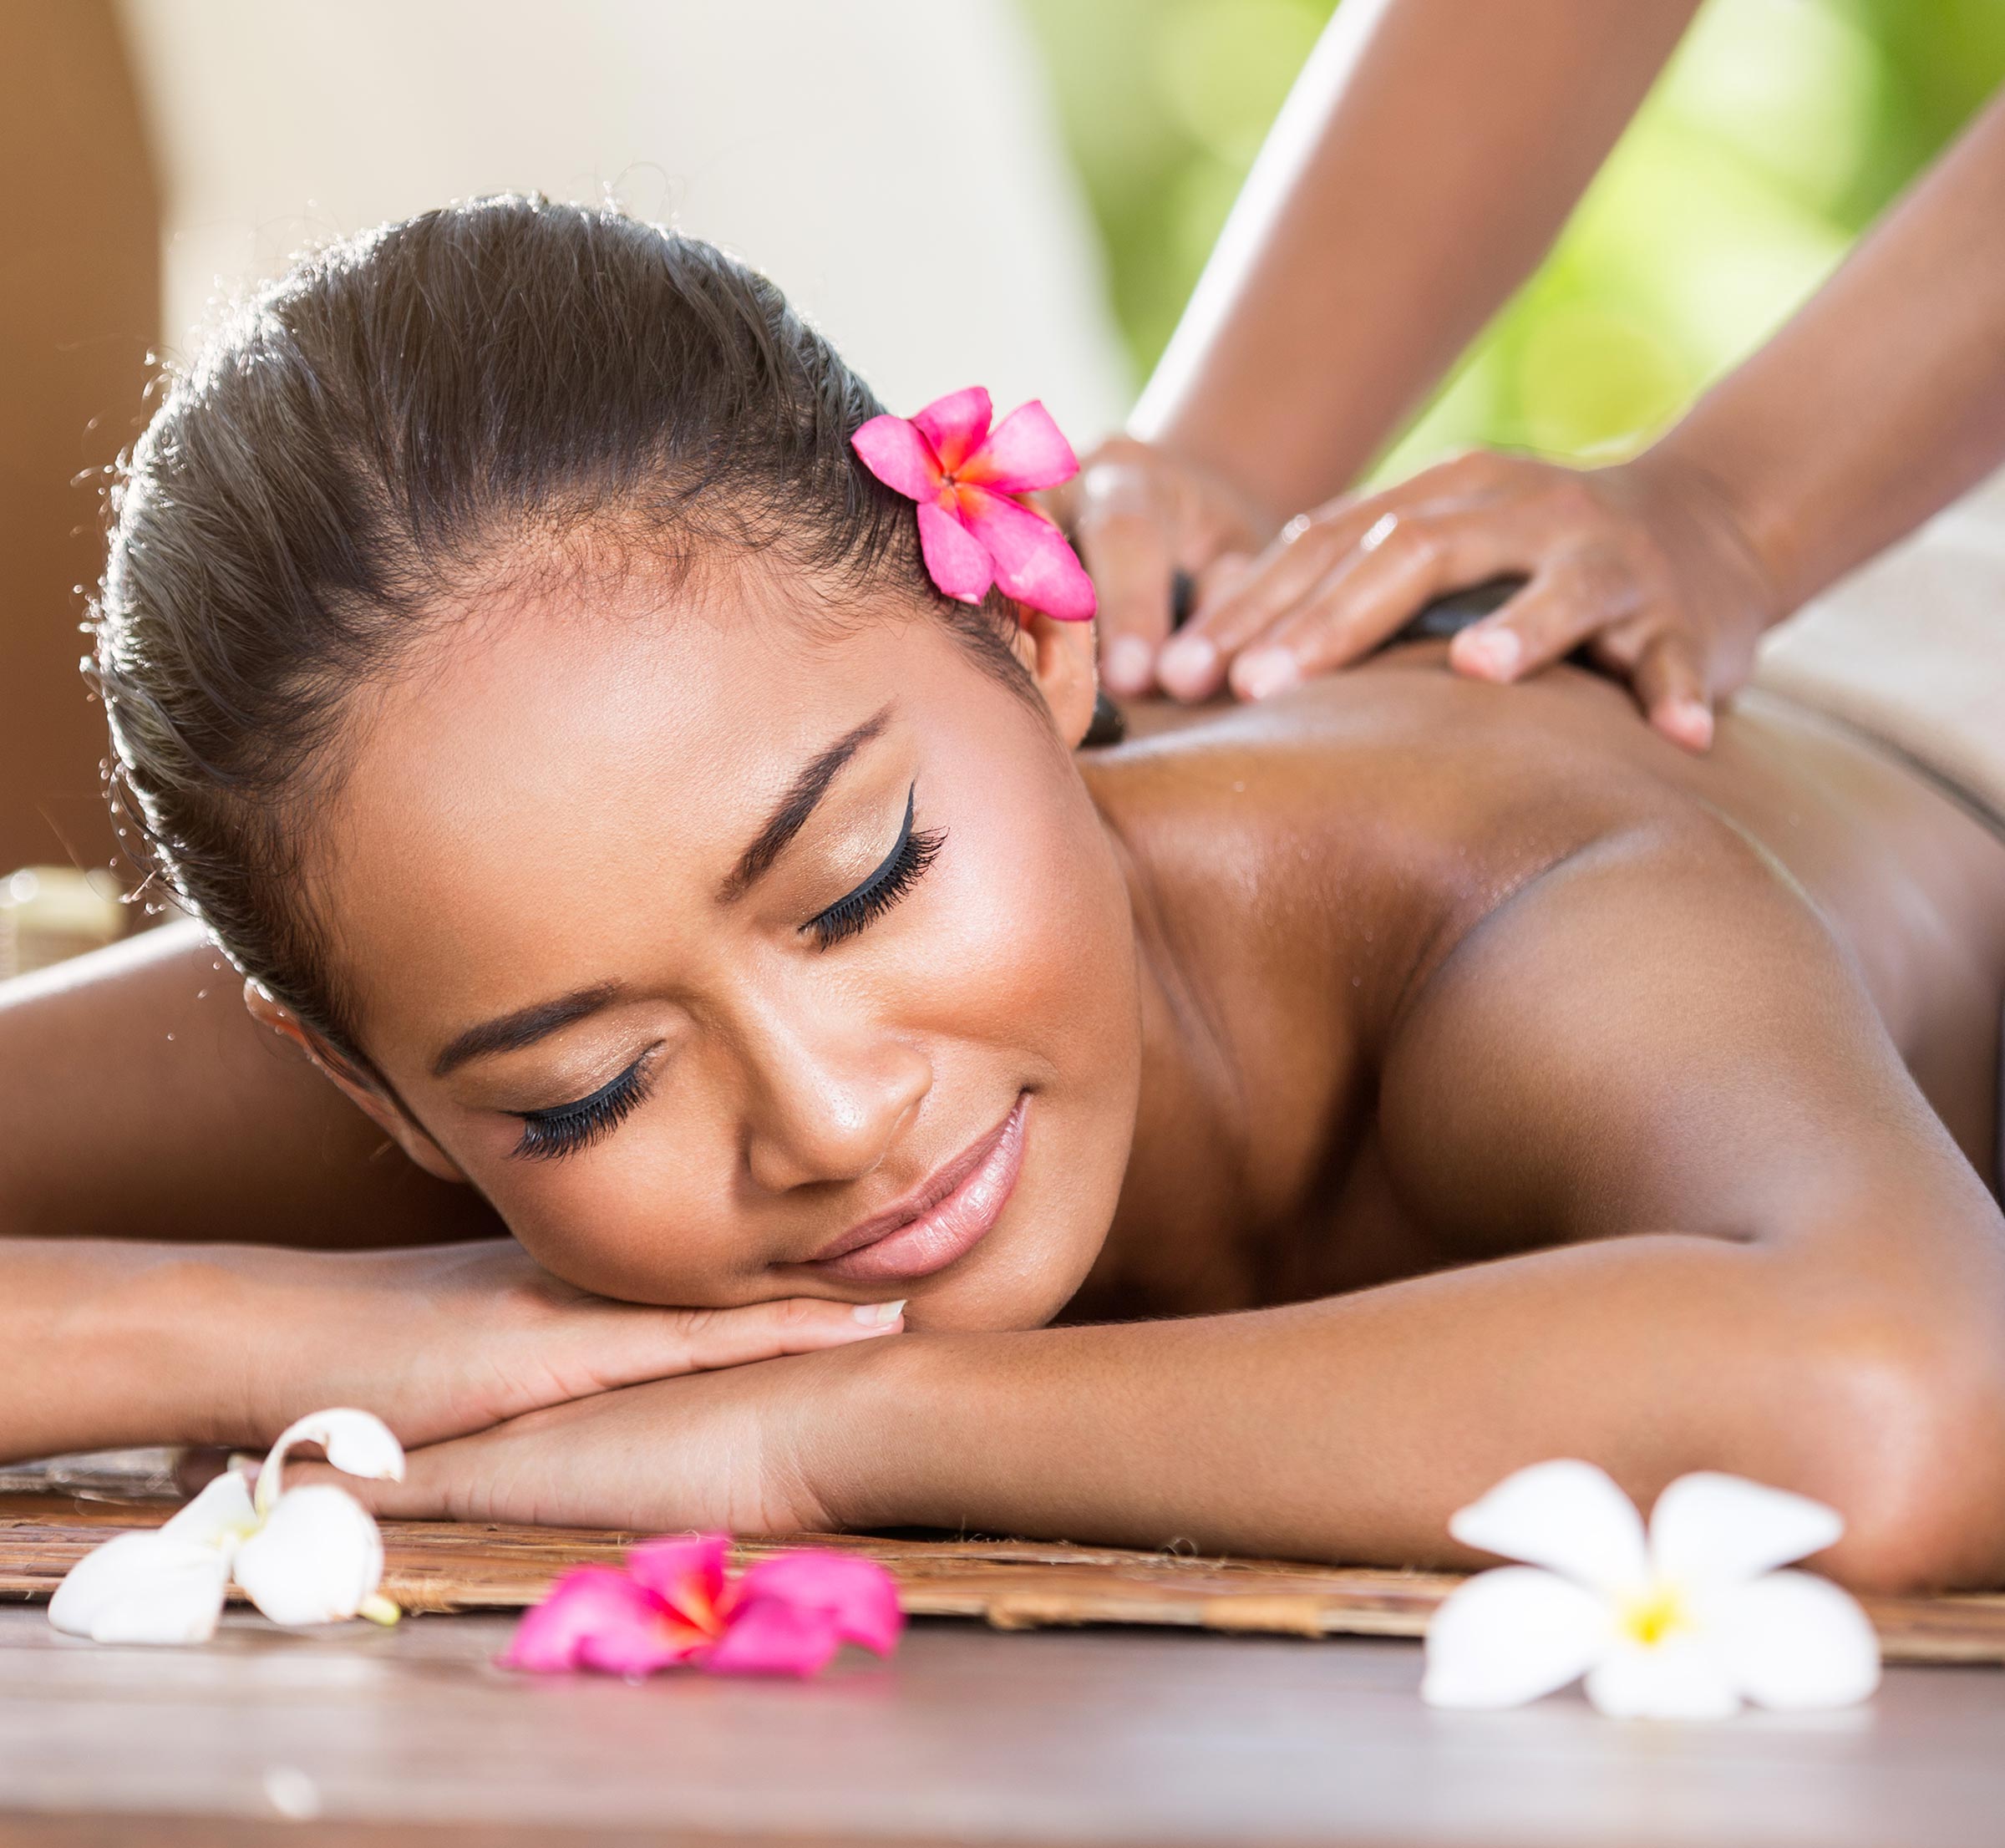 What Are The Healthy Effects of Massage Therapy on Body?